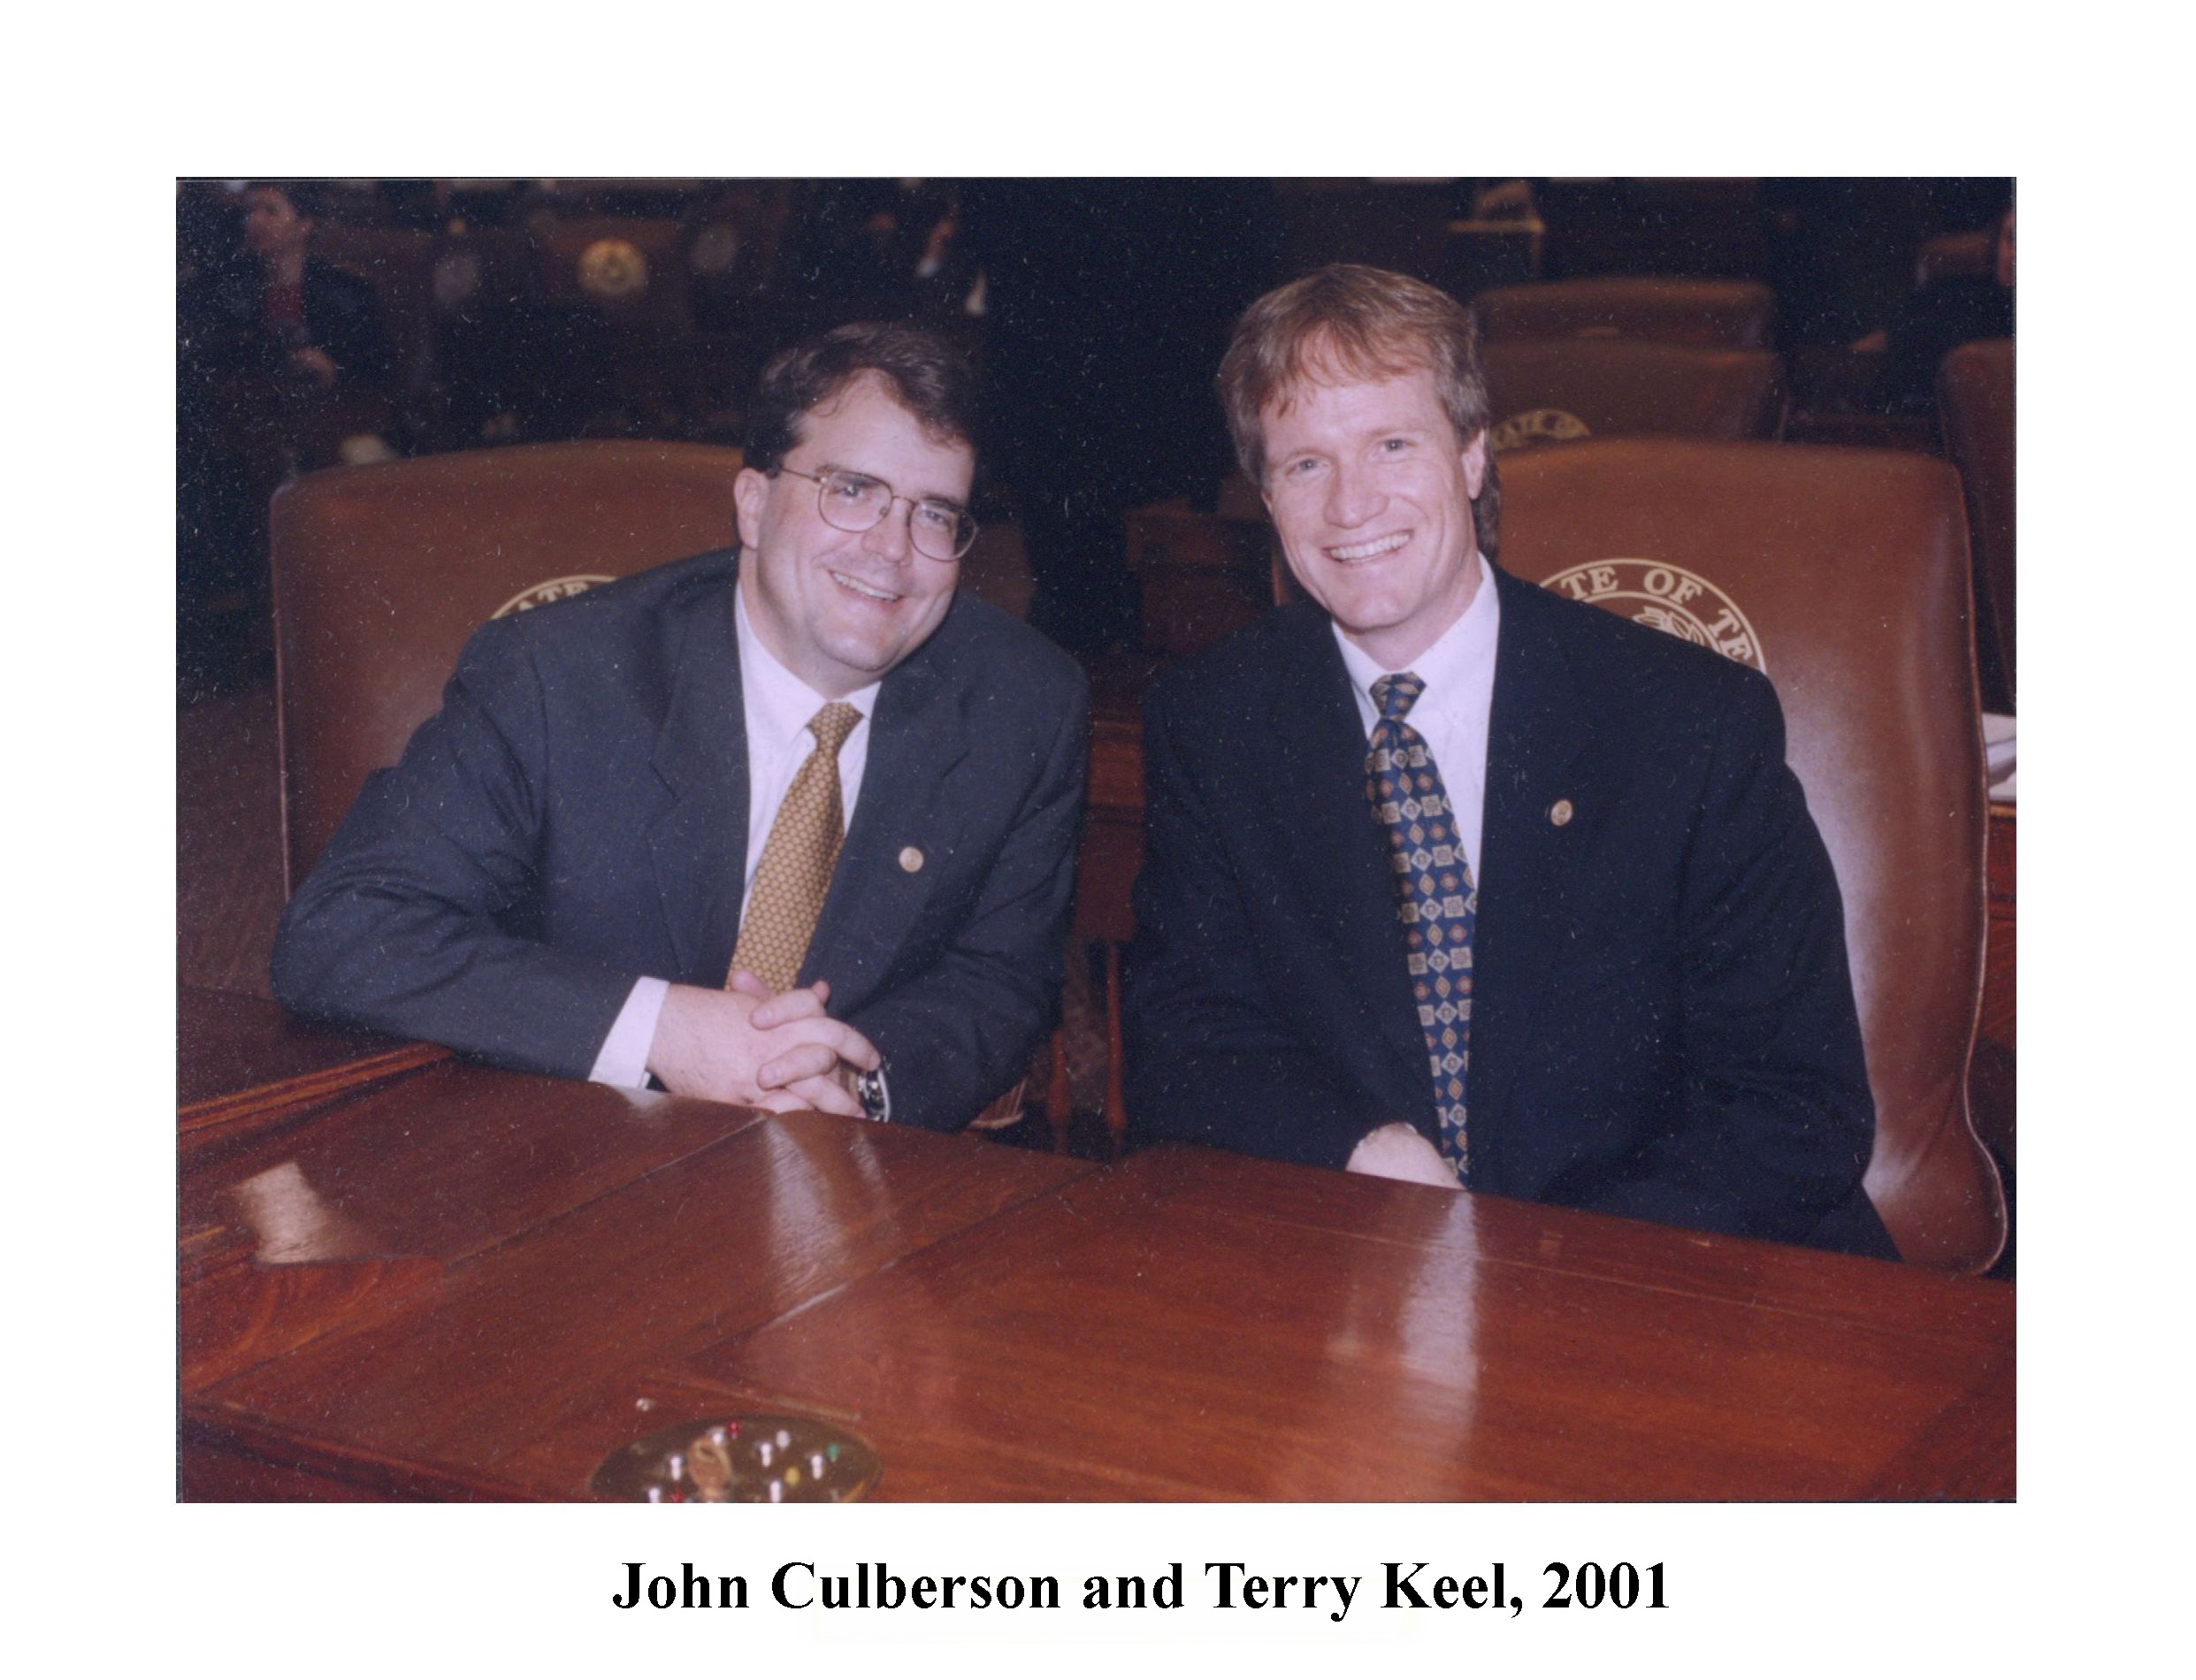 John Culberson and Terry Keel, 2001. Photo courtesy of Terry Keel